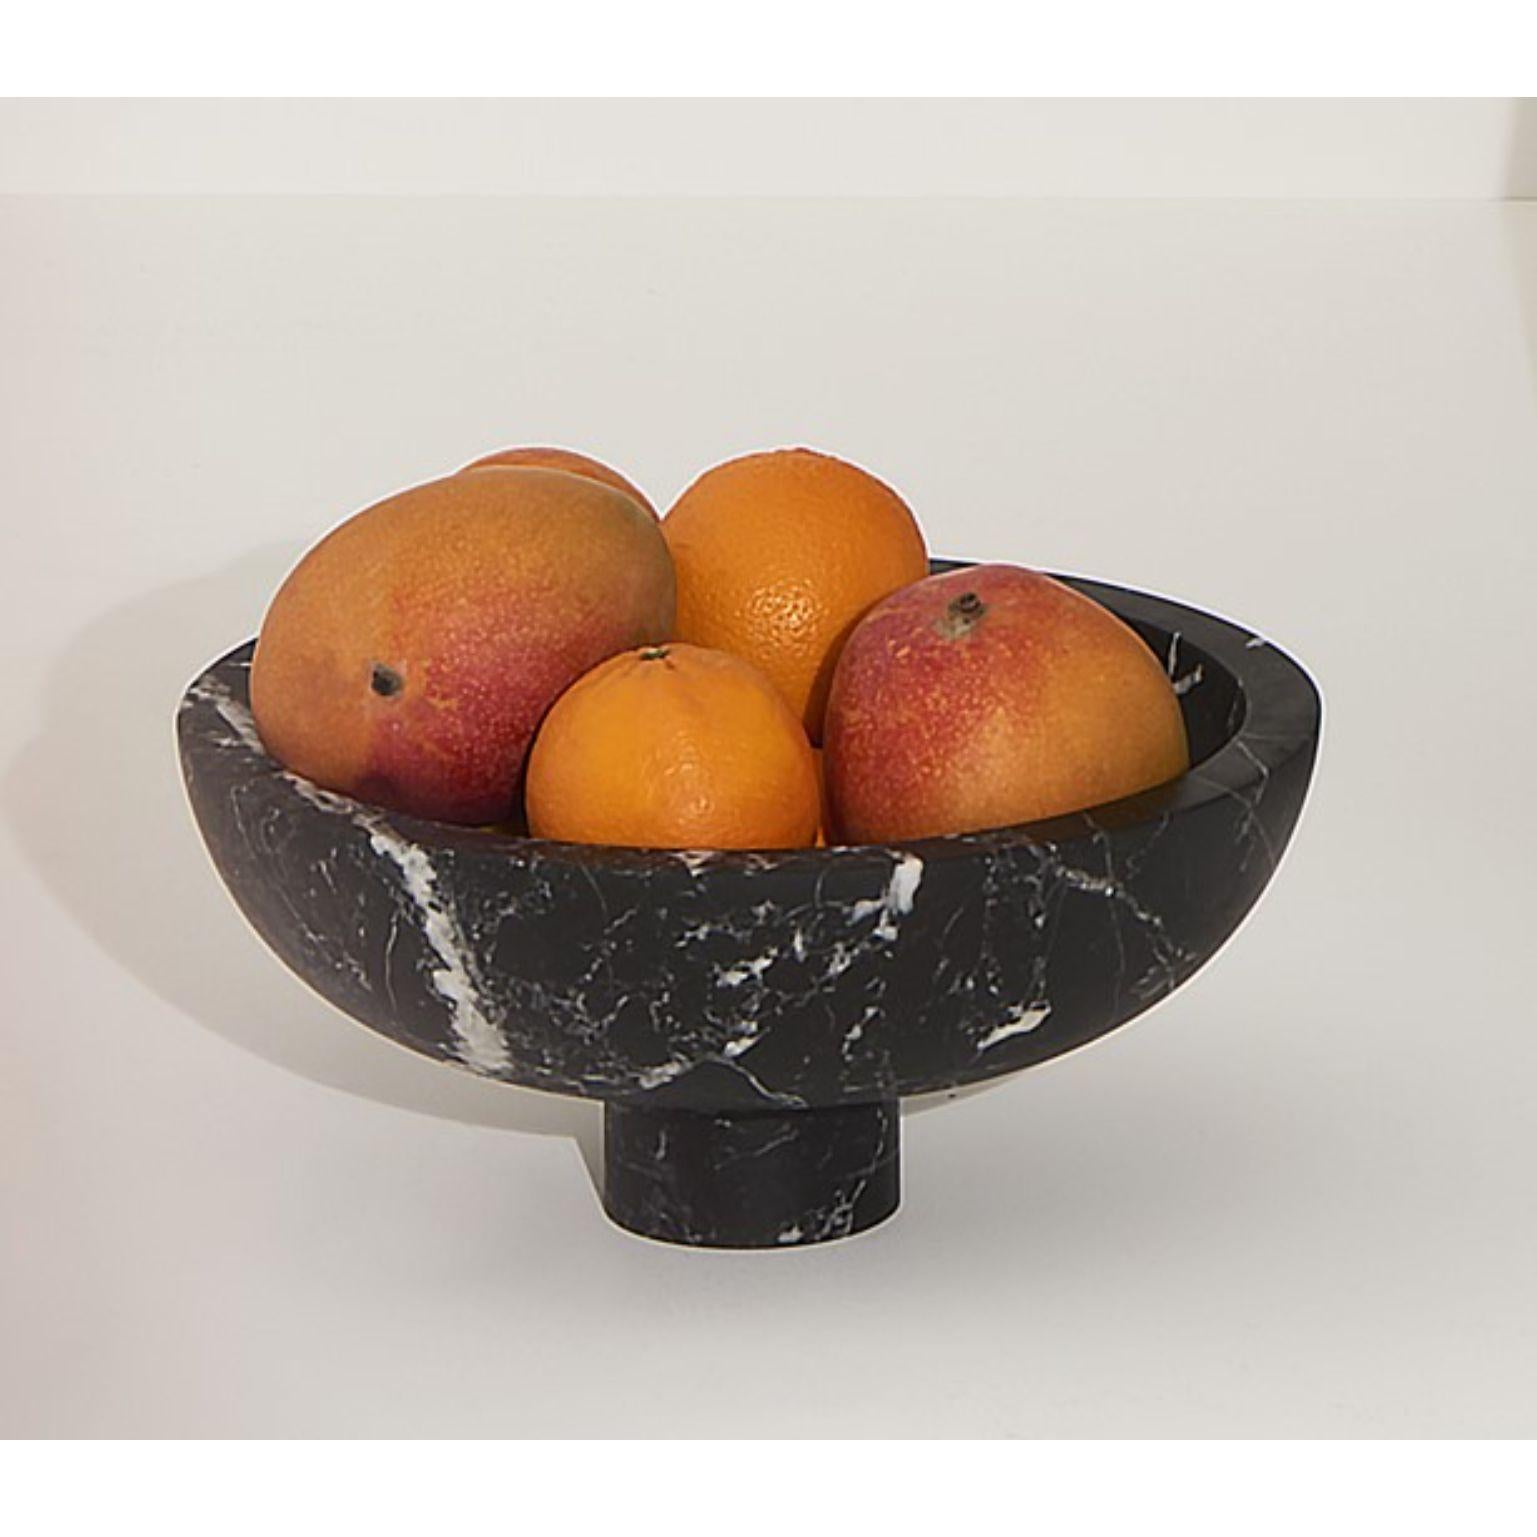 Inside Out bowl by Karen Chekerdjian
Dimensions: 31 x 14 cm
Materials: Bianco Arabescato

Also available: Red, black, tobacco brown marbles

The value of change in a simple act. Karen Chekerdjian’s creation puts design front and centre: from